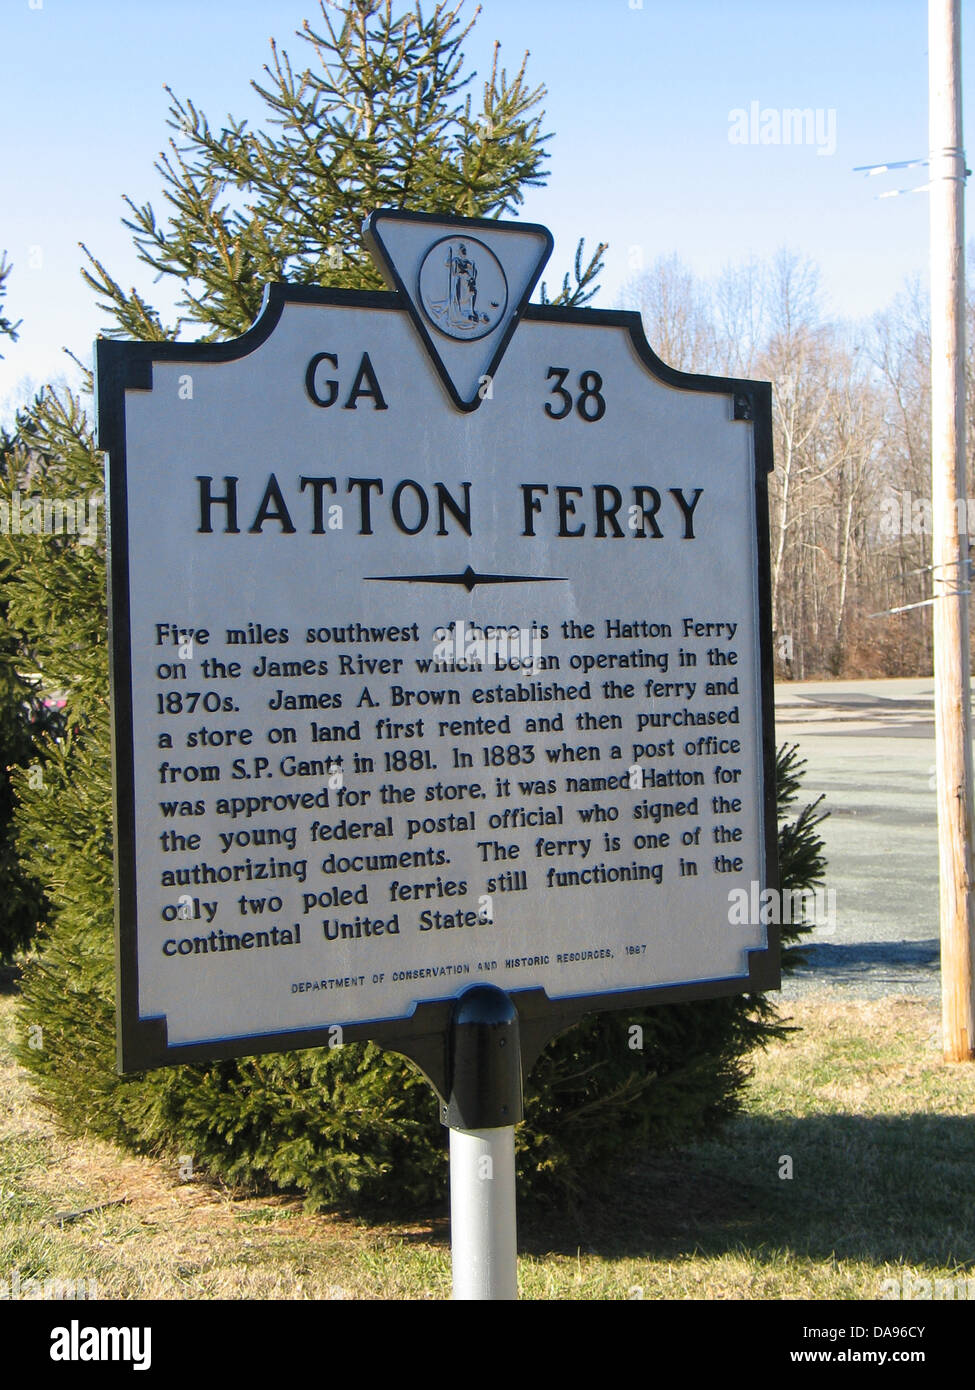 HATTON FERRY Five miles southwest of here is the Hatton Ferry which began operating in the 1870s. James A. Brown established the ferry and a store on land first rented and then purchased from S.P. Gantt in 1881. In 1883 when a post office was approved for the store, it was named Hatton for the young federal postal official who signed the authorizing documents. The ferry is one of the only two poled ferries still functioning in the continental United States. Department of Conservation and Historic Resources, 1987 Stock Photo